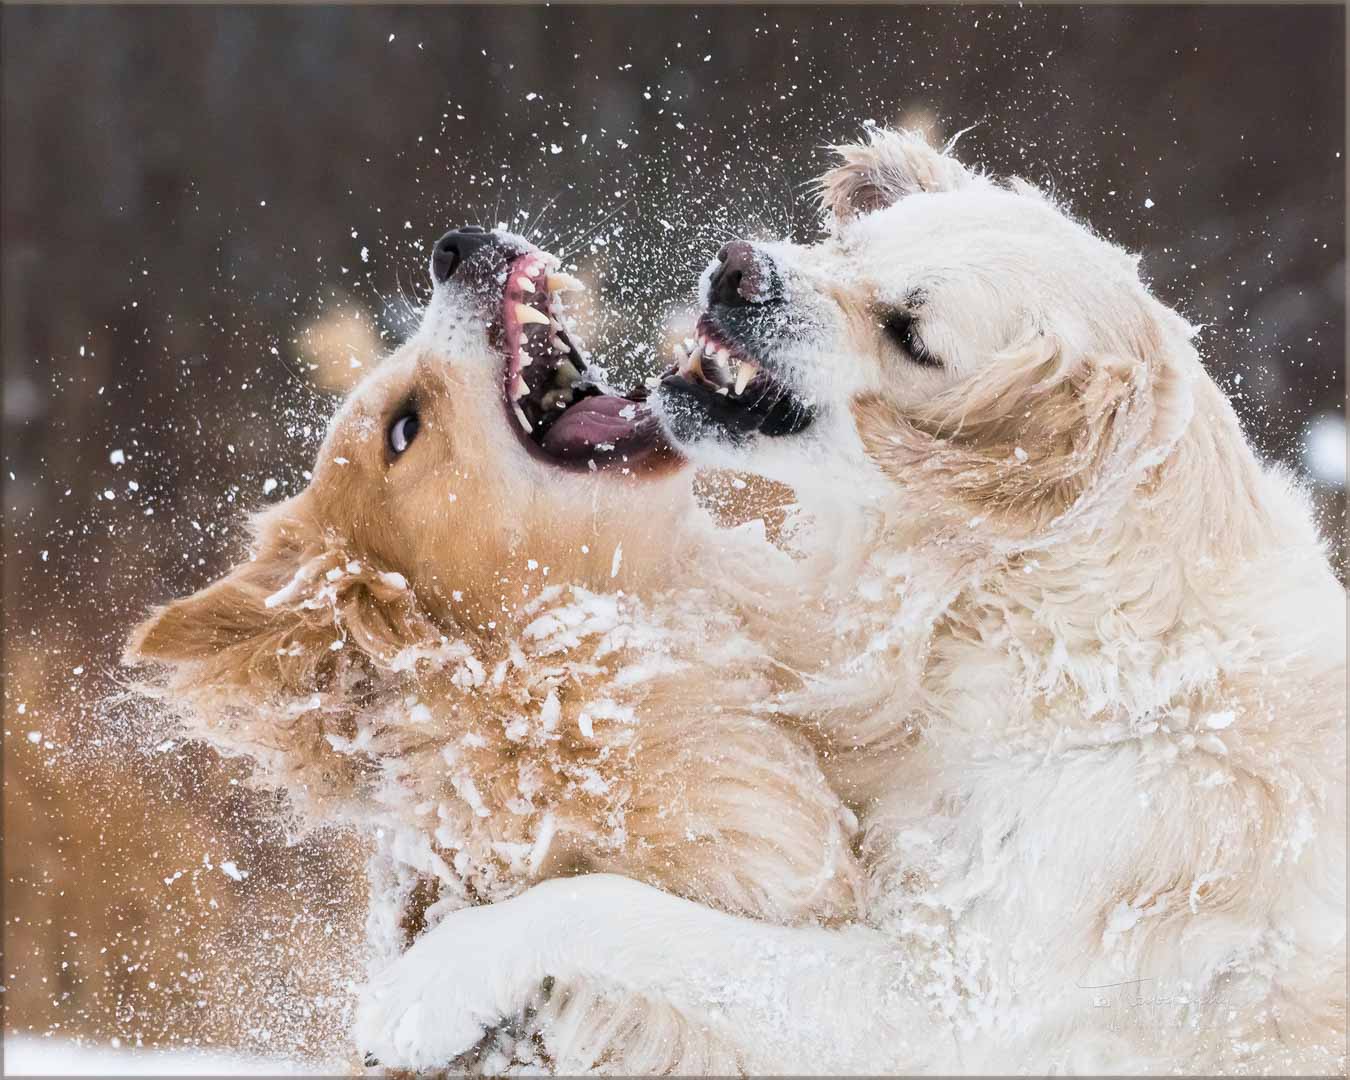 Golden Retrievers playing in the snow